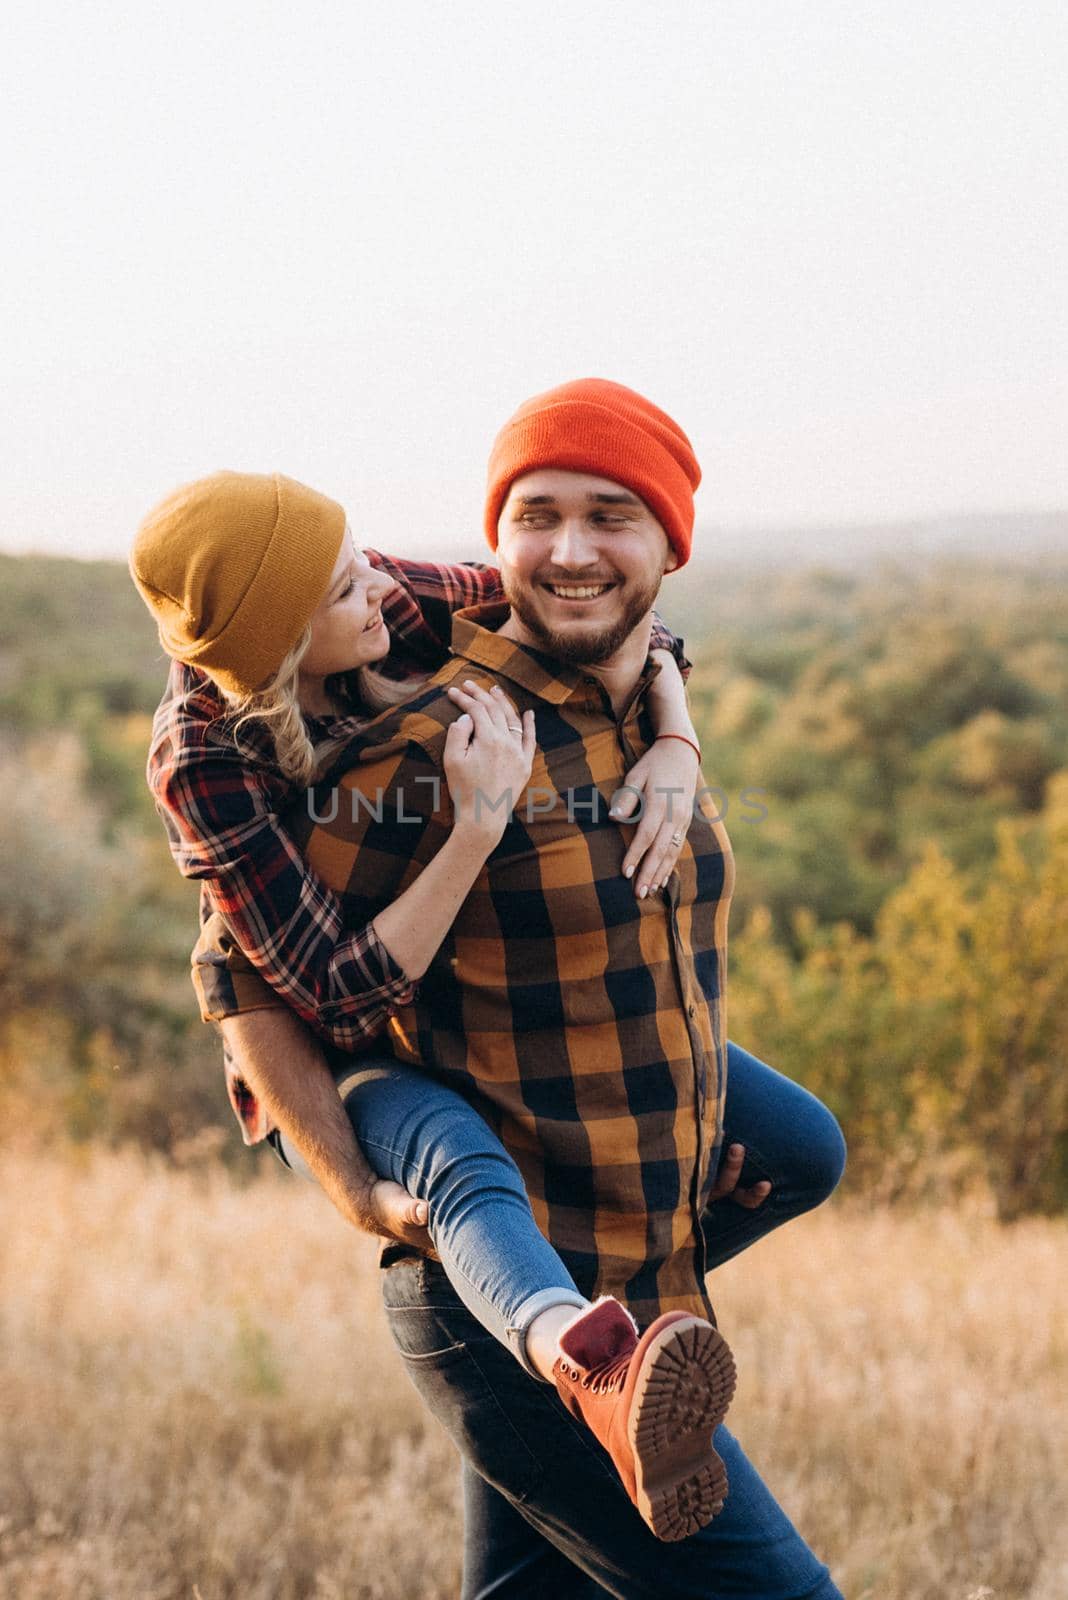 Cheerful guy and girl on a walk in bright knitted hats and plaid shirts